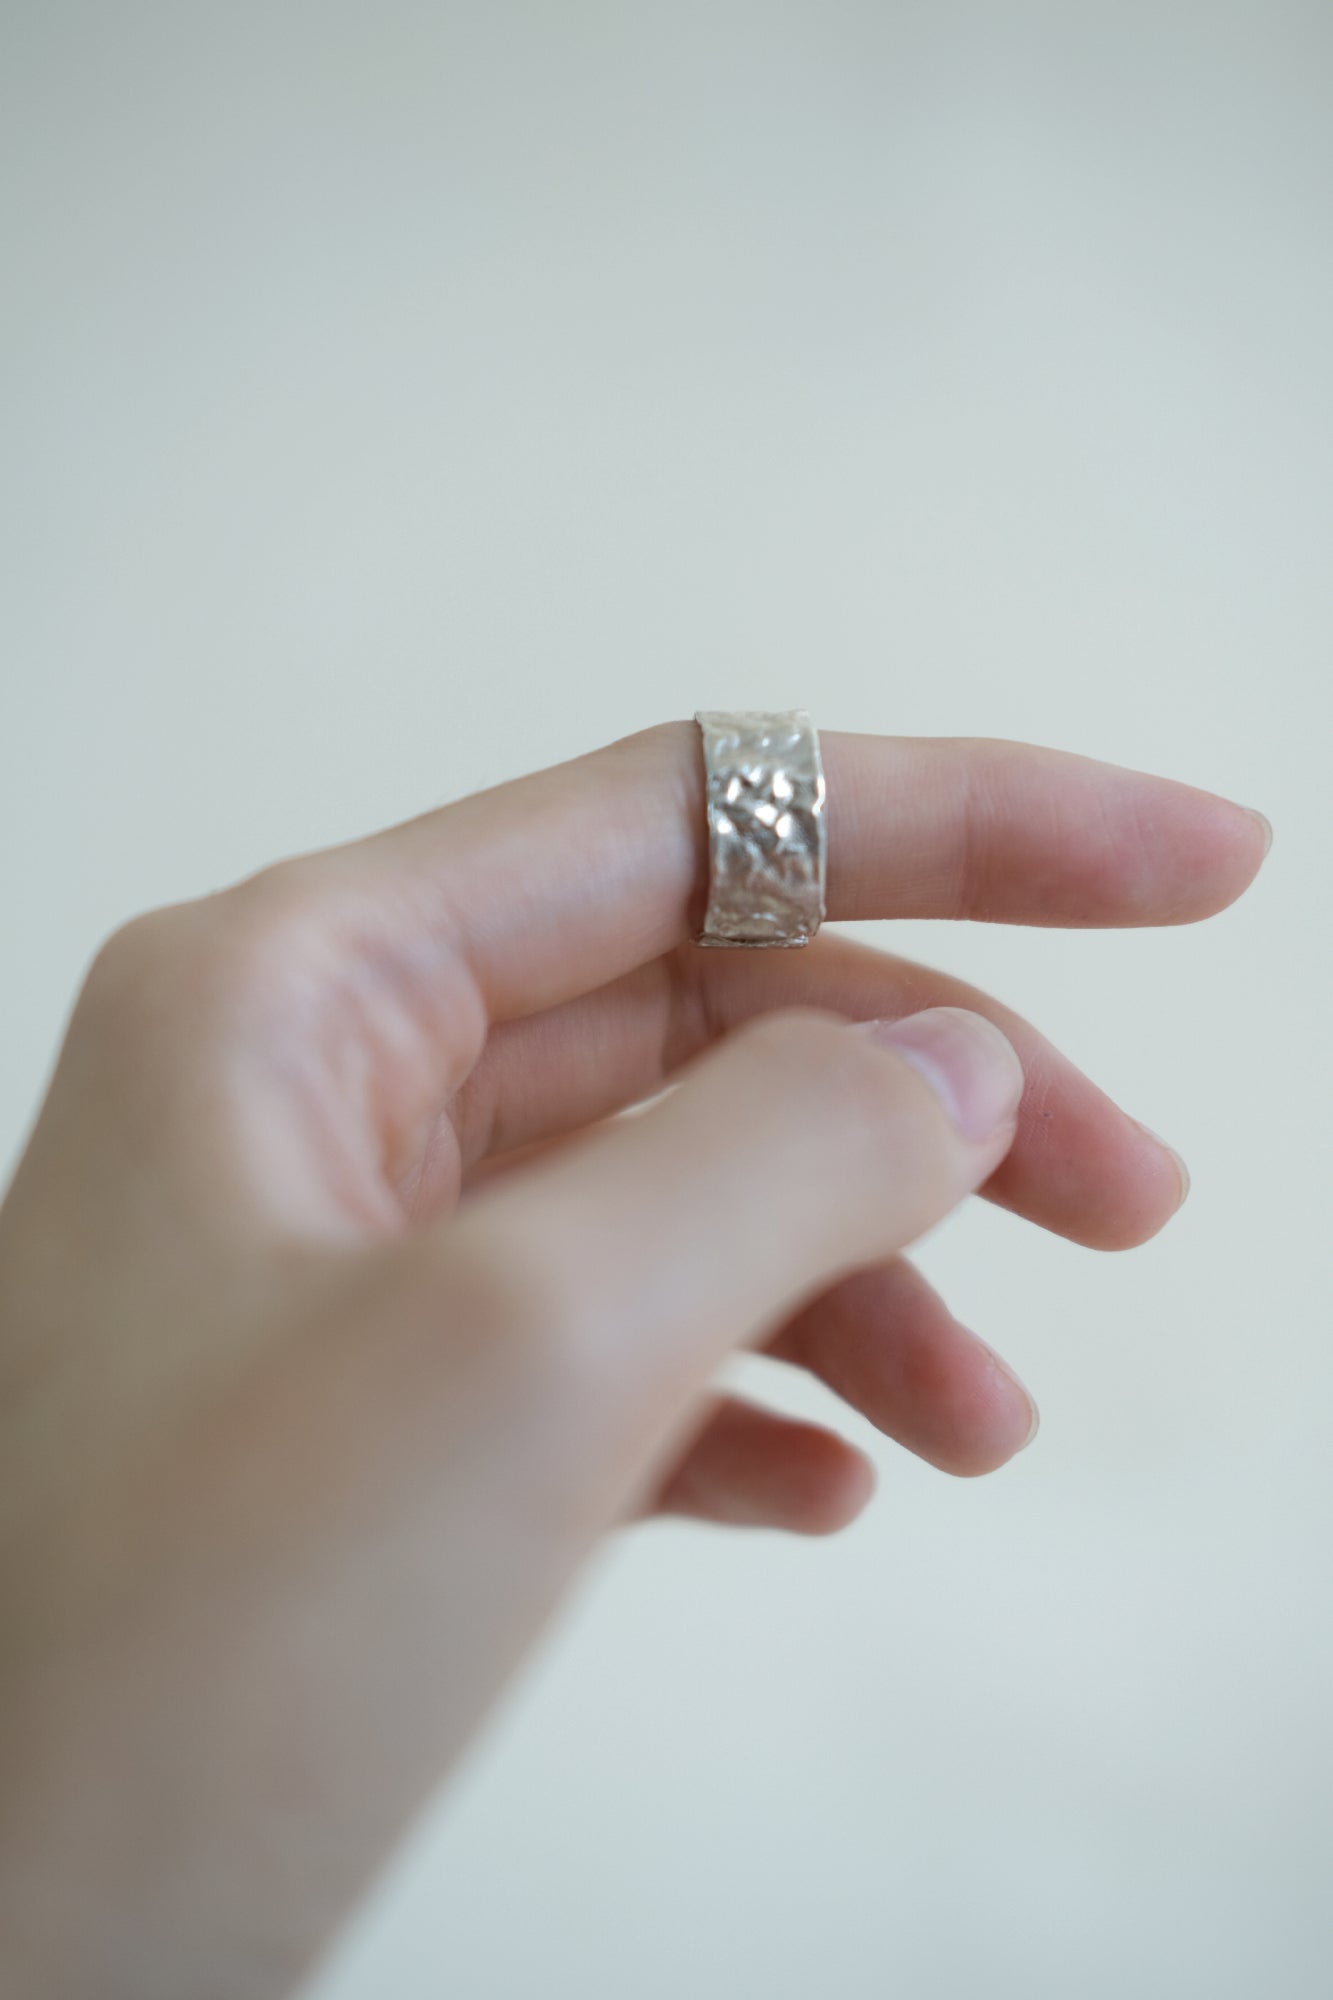 Tinfoil wrinkled metal texture ring in Sterling Silver